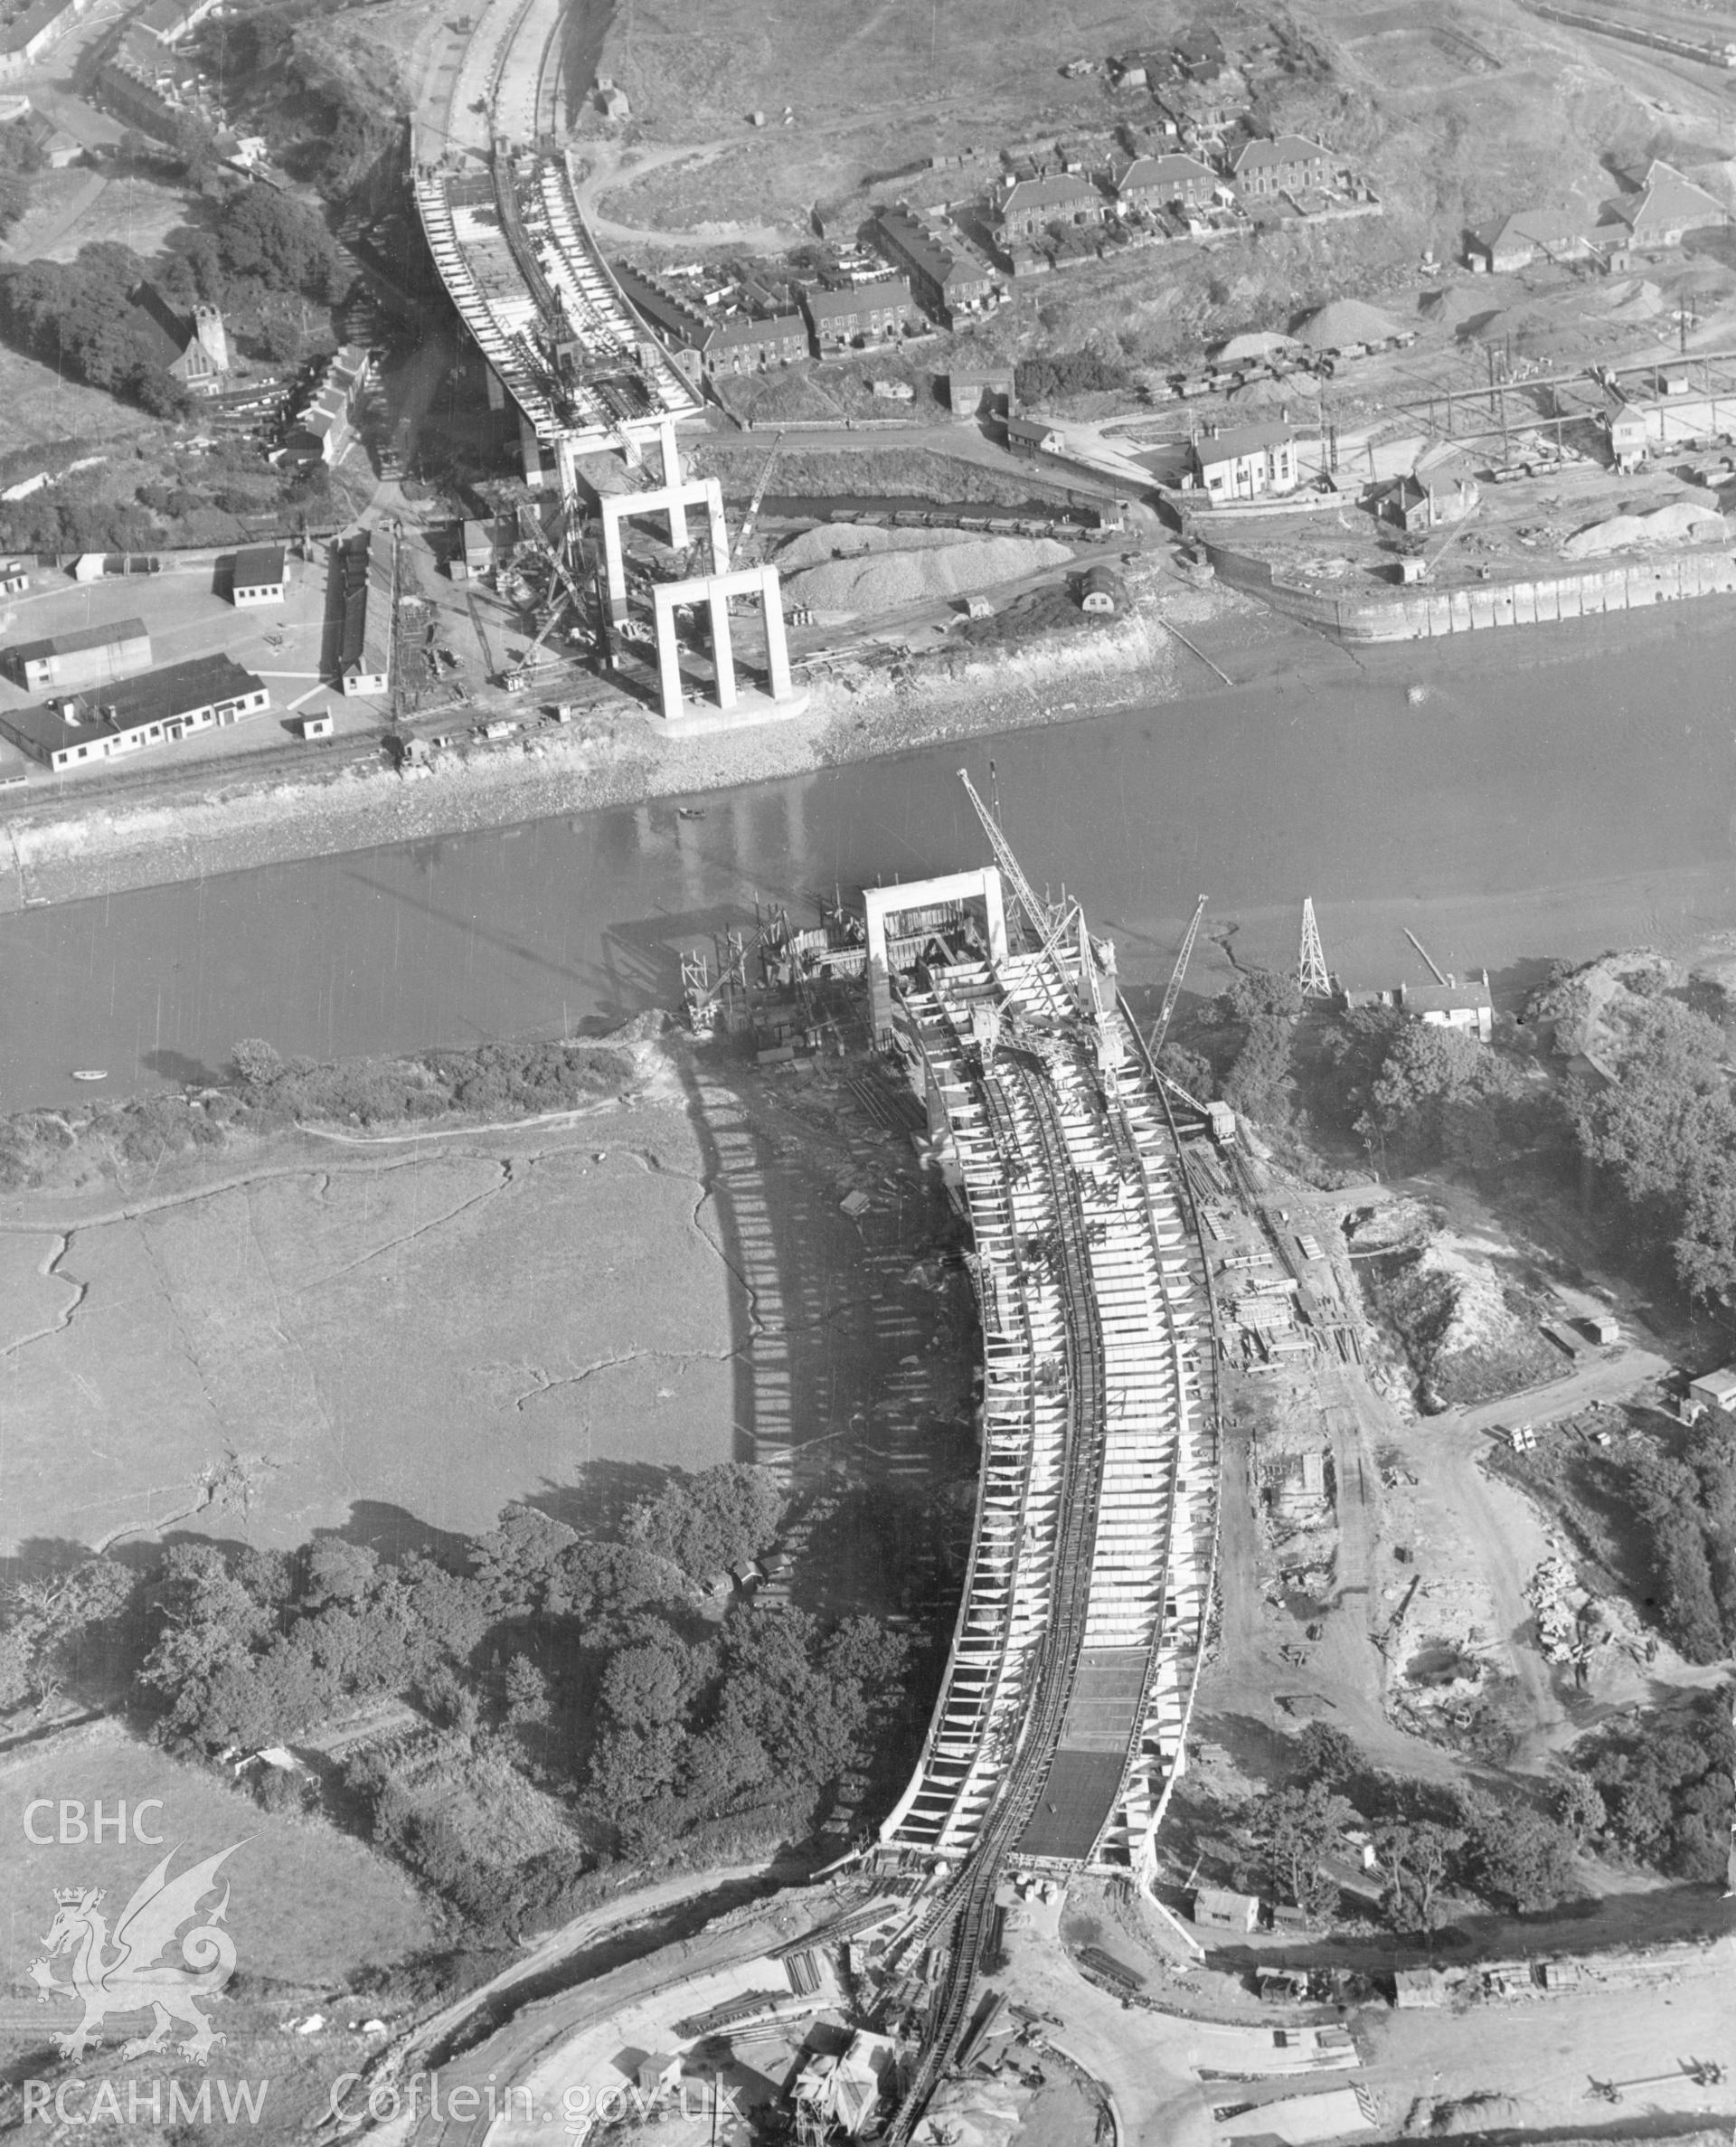 1 b/w print showing an aerial view of the A48 Neath bridge and Earleswood Roundabout under construction, dated 1952, collated by the former Central Office of Information.